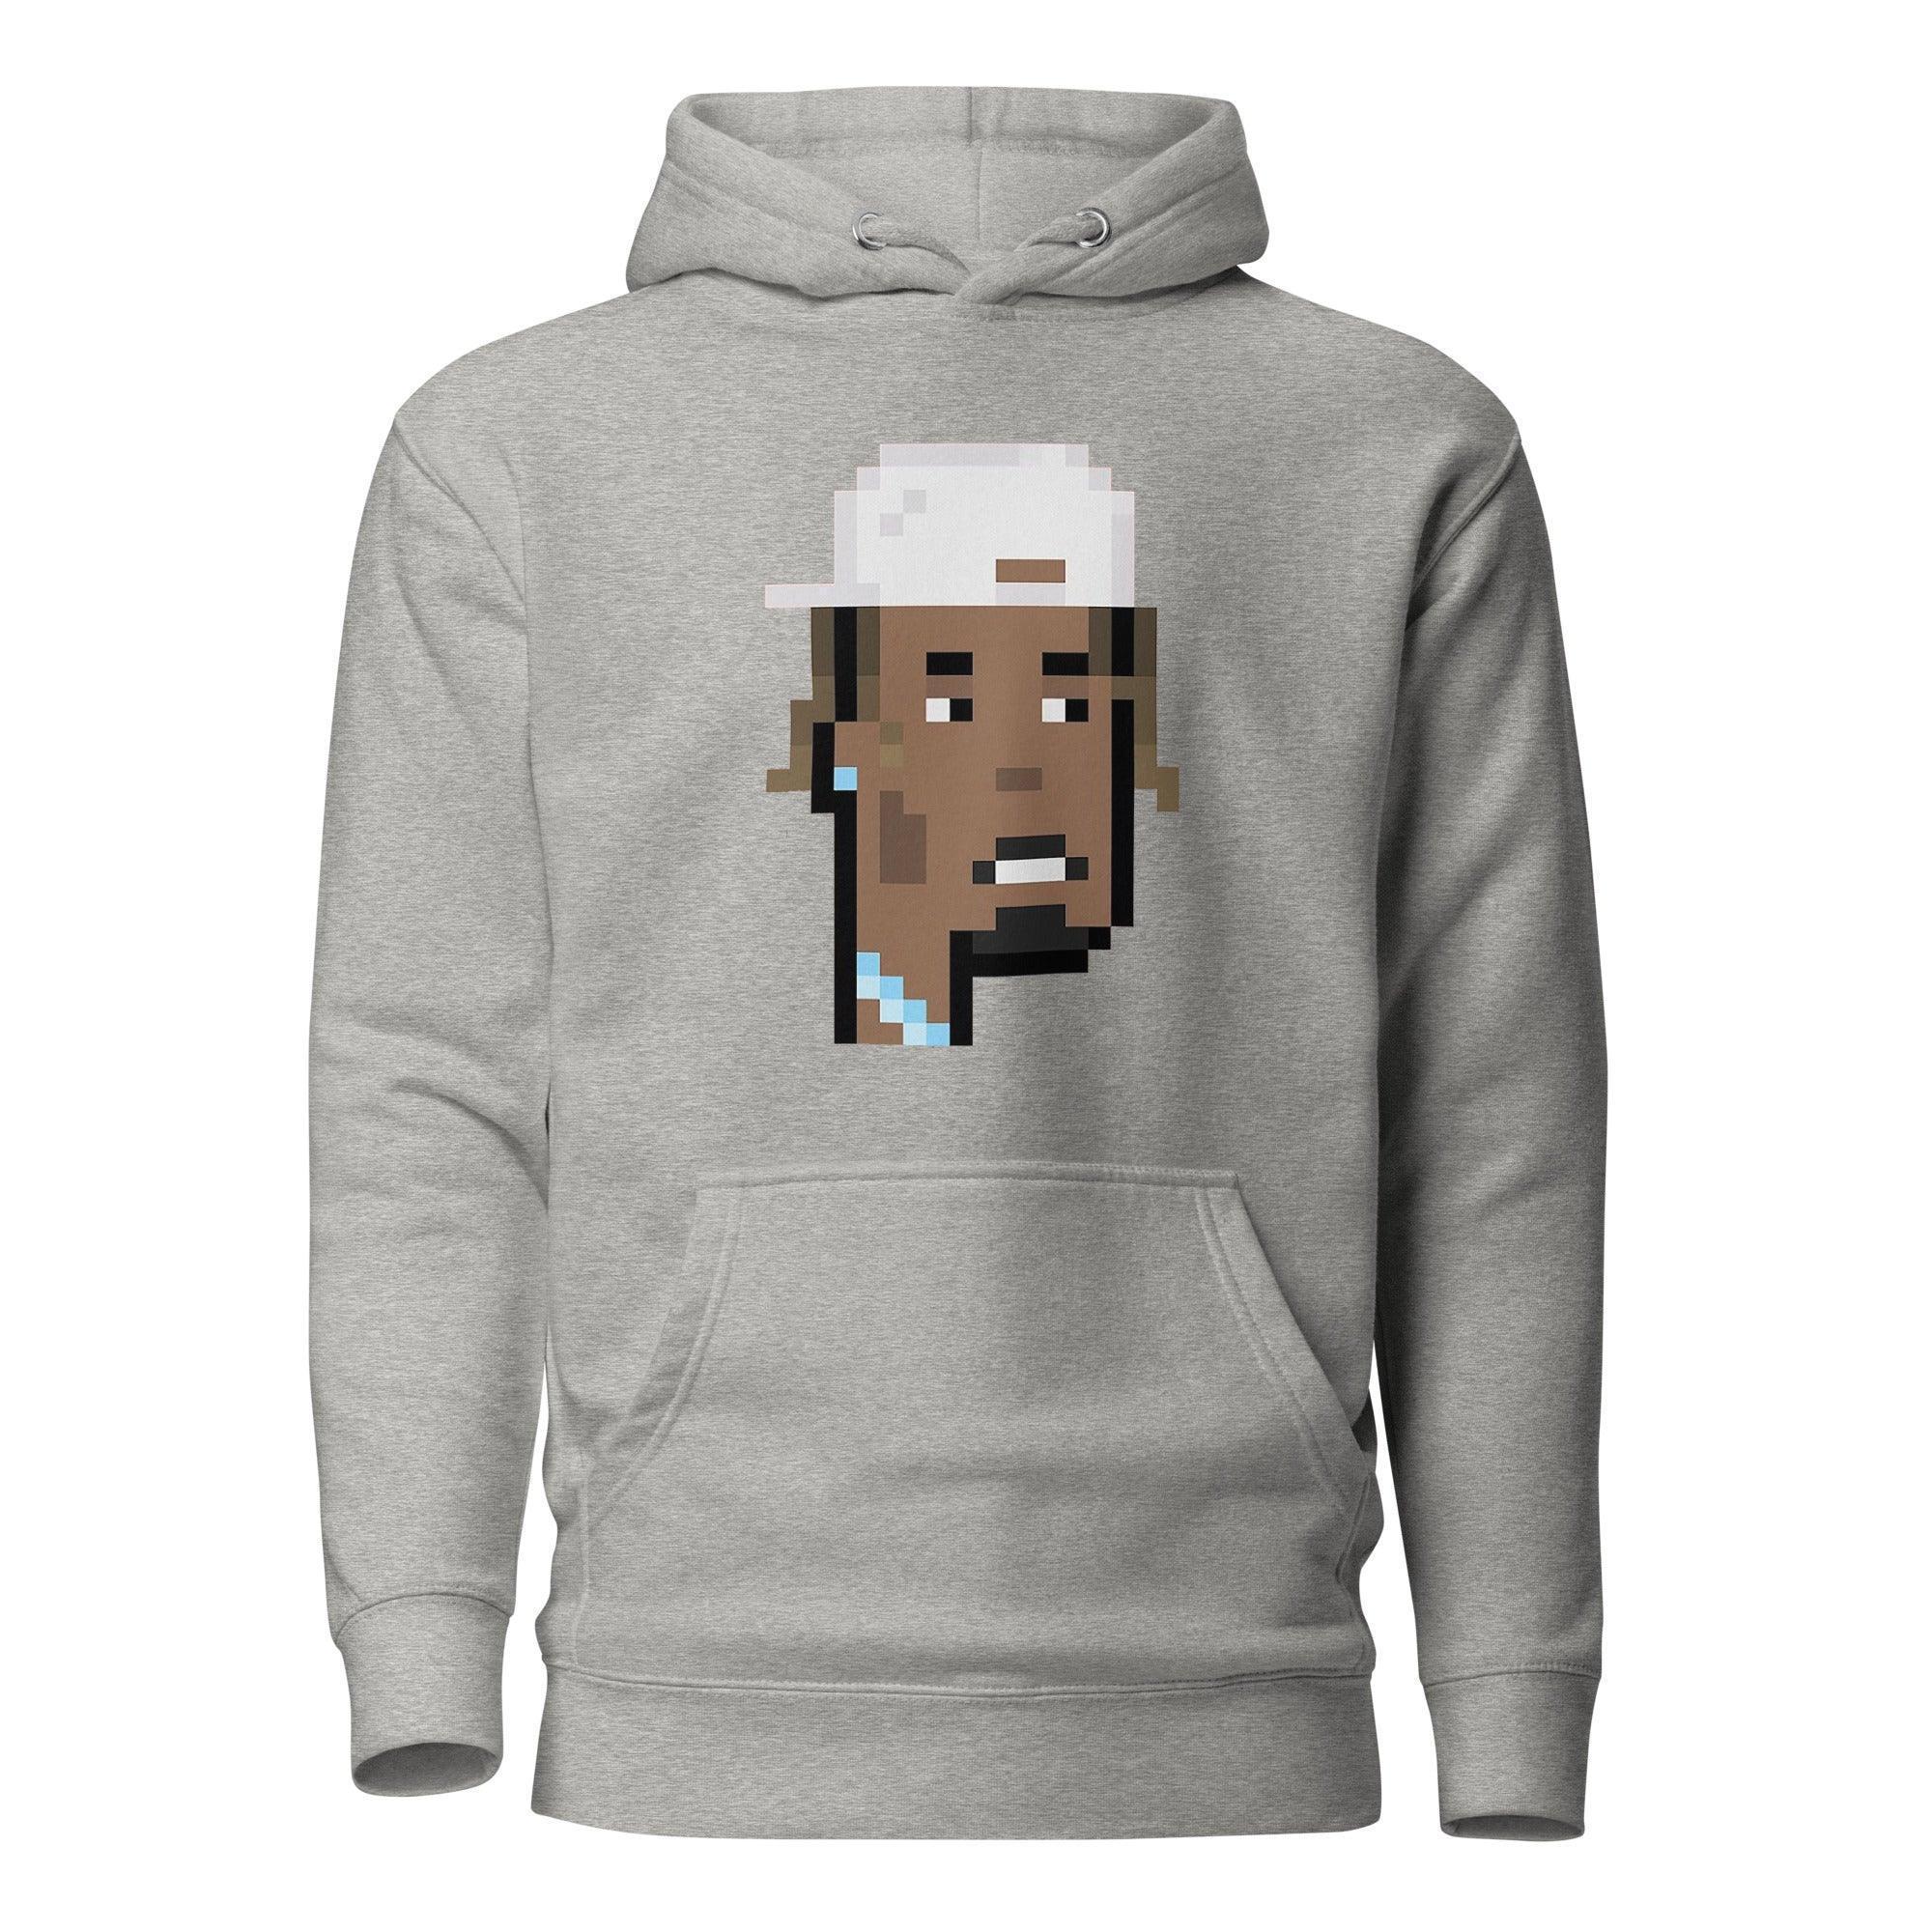 Celebrity Punk 4 Pullover Hoodie - InvestmenTees